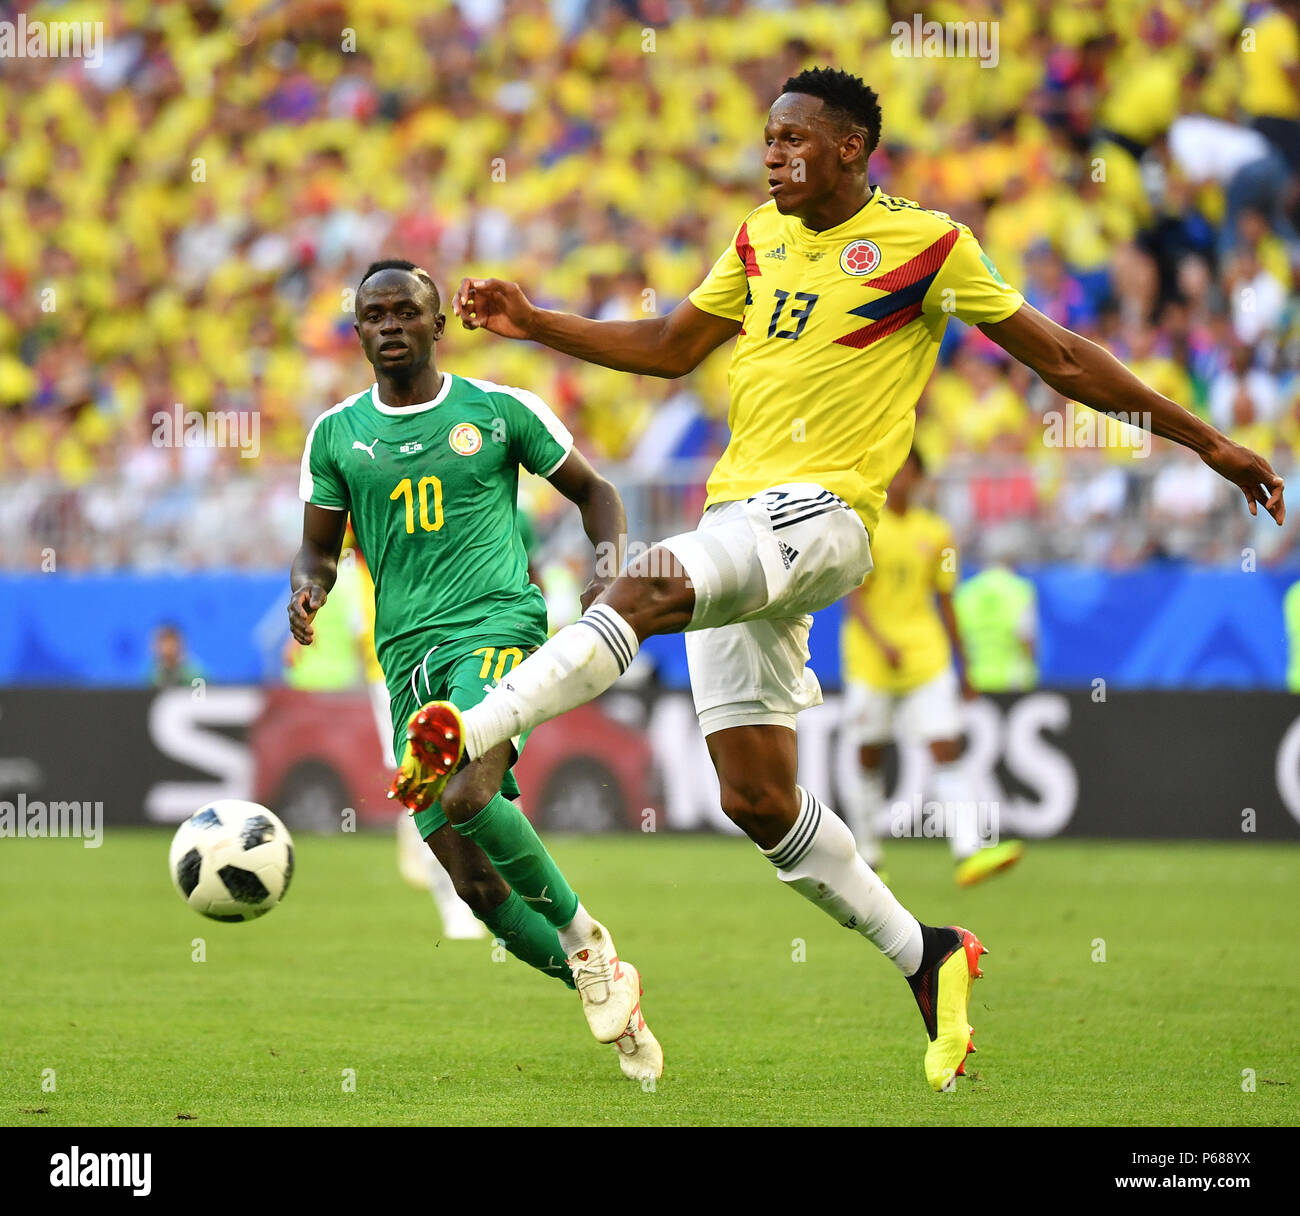 Samara Russia 28th June 18 Yerry Mina R Of Colombia Vies With Sadio Mane Of Senegal During The 18 Fifa World Cup Group H Match Between Colombia And Senegal In Samara Russia